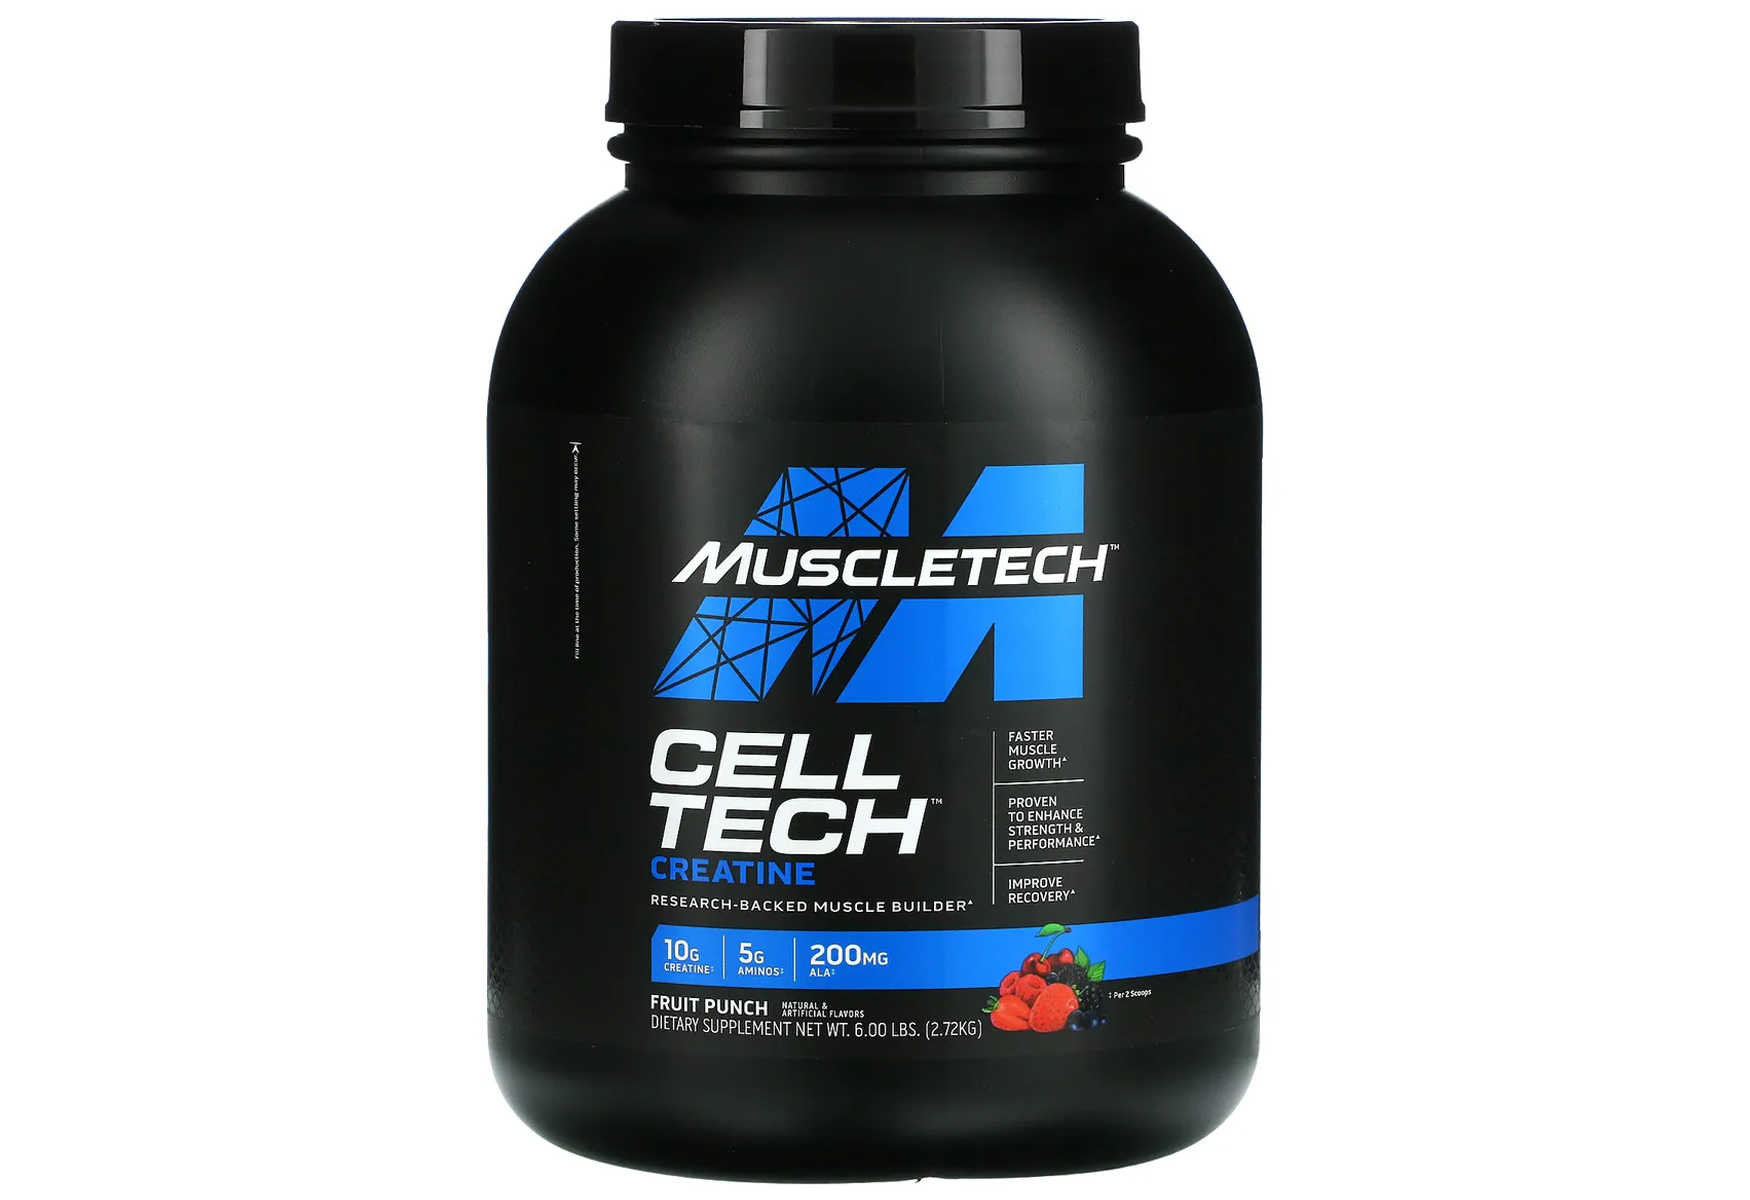 19-cell-tech-nutrition-facts